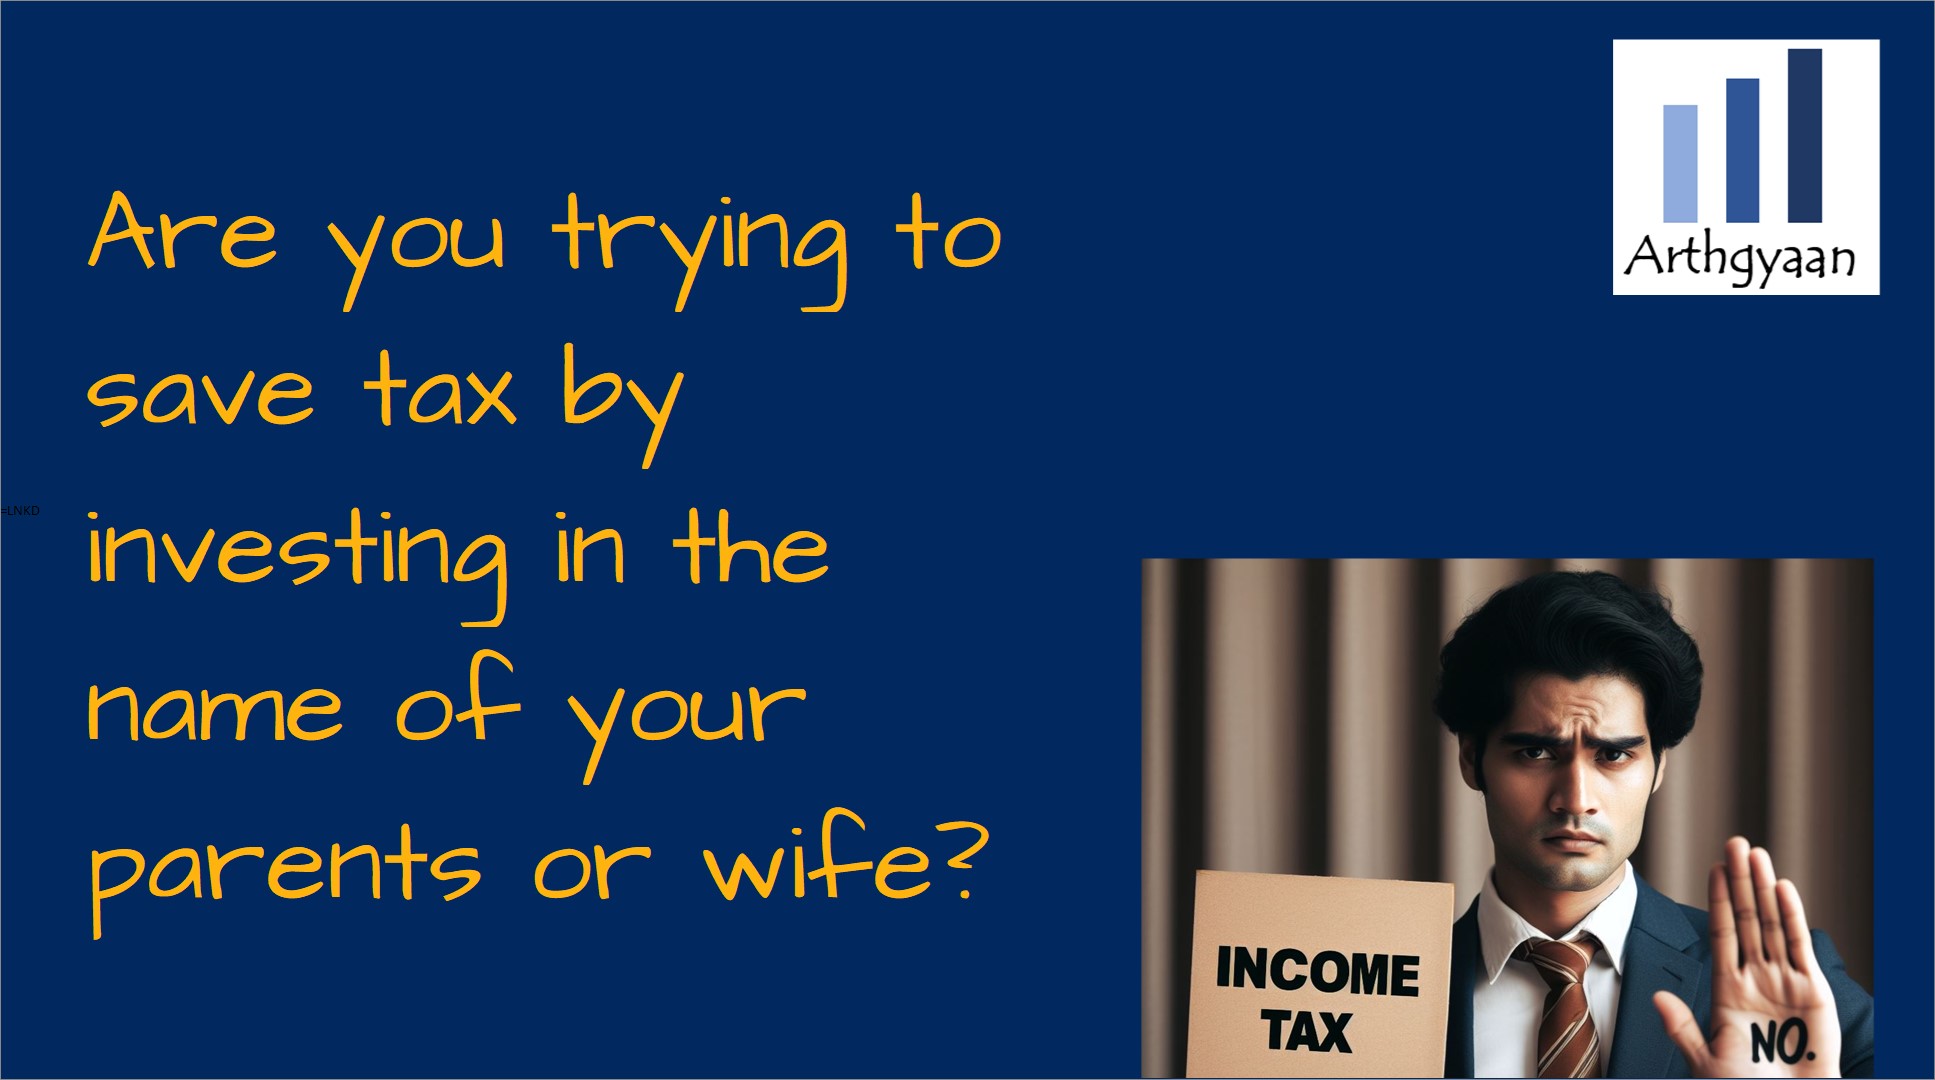 Do You Have to Pay Tax on Gifts?